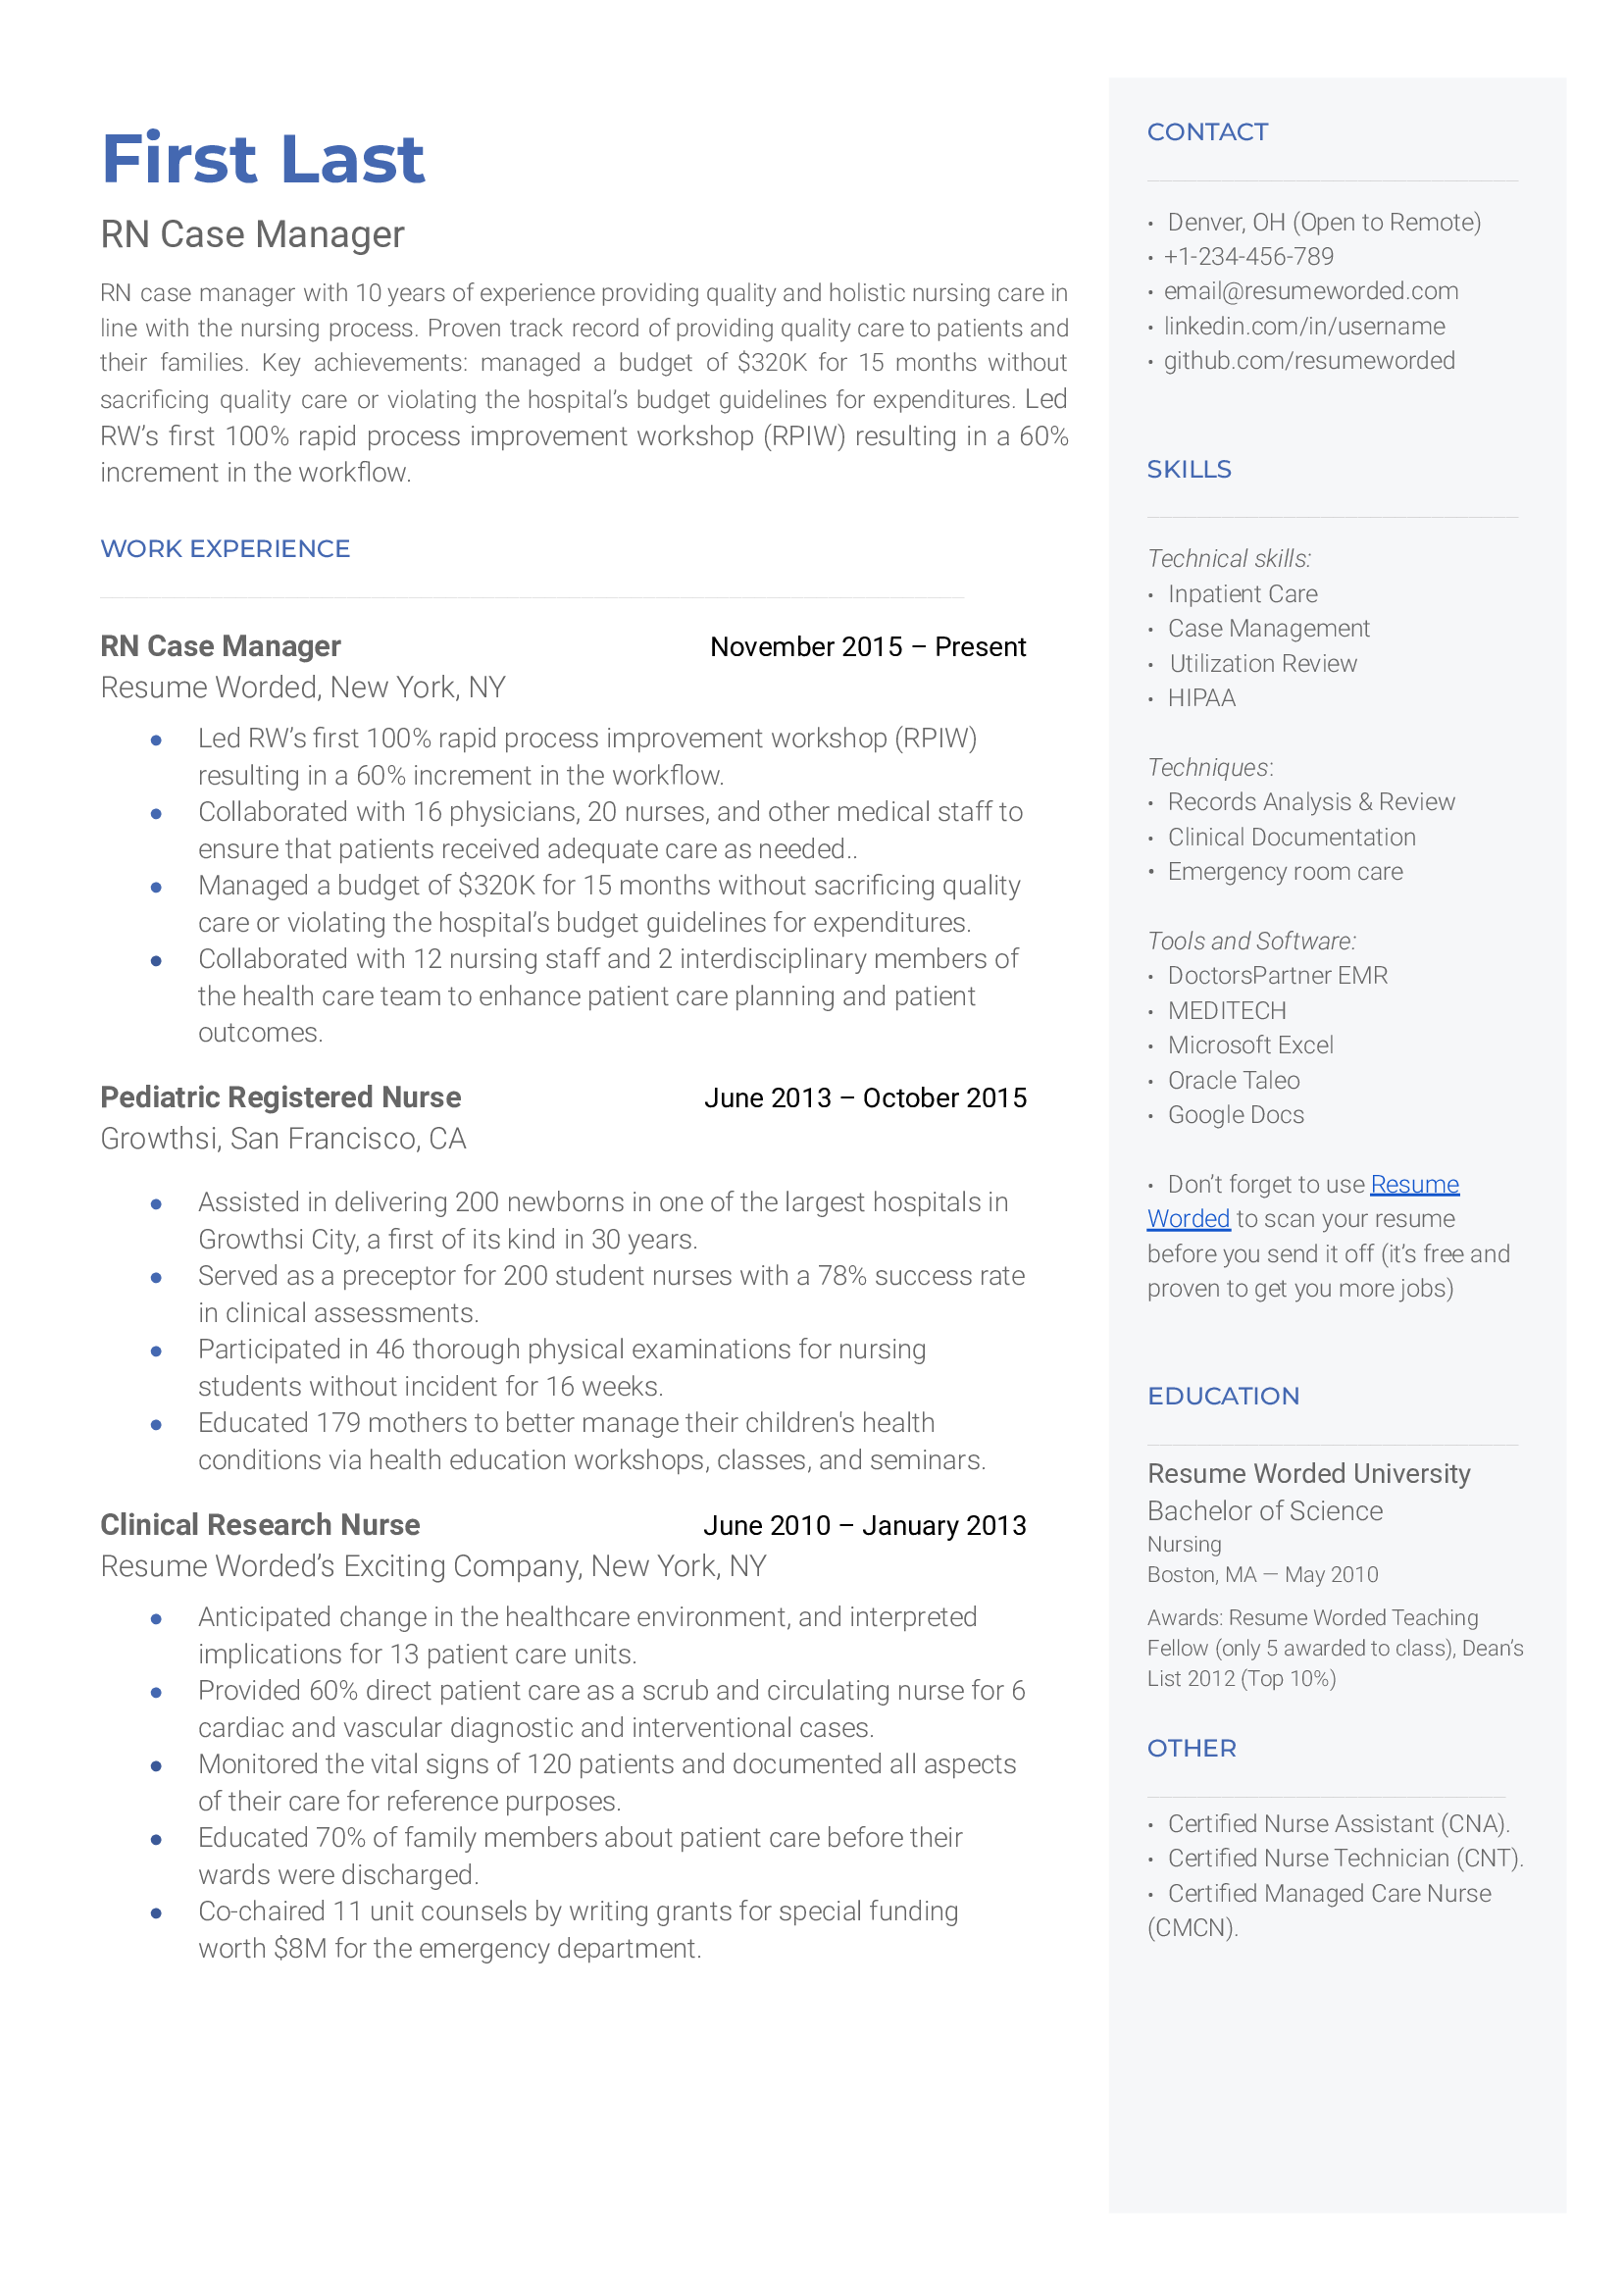 A resume for an RN case manager with a BSN degree and experience as a pediatric RN and clinical research nurse.